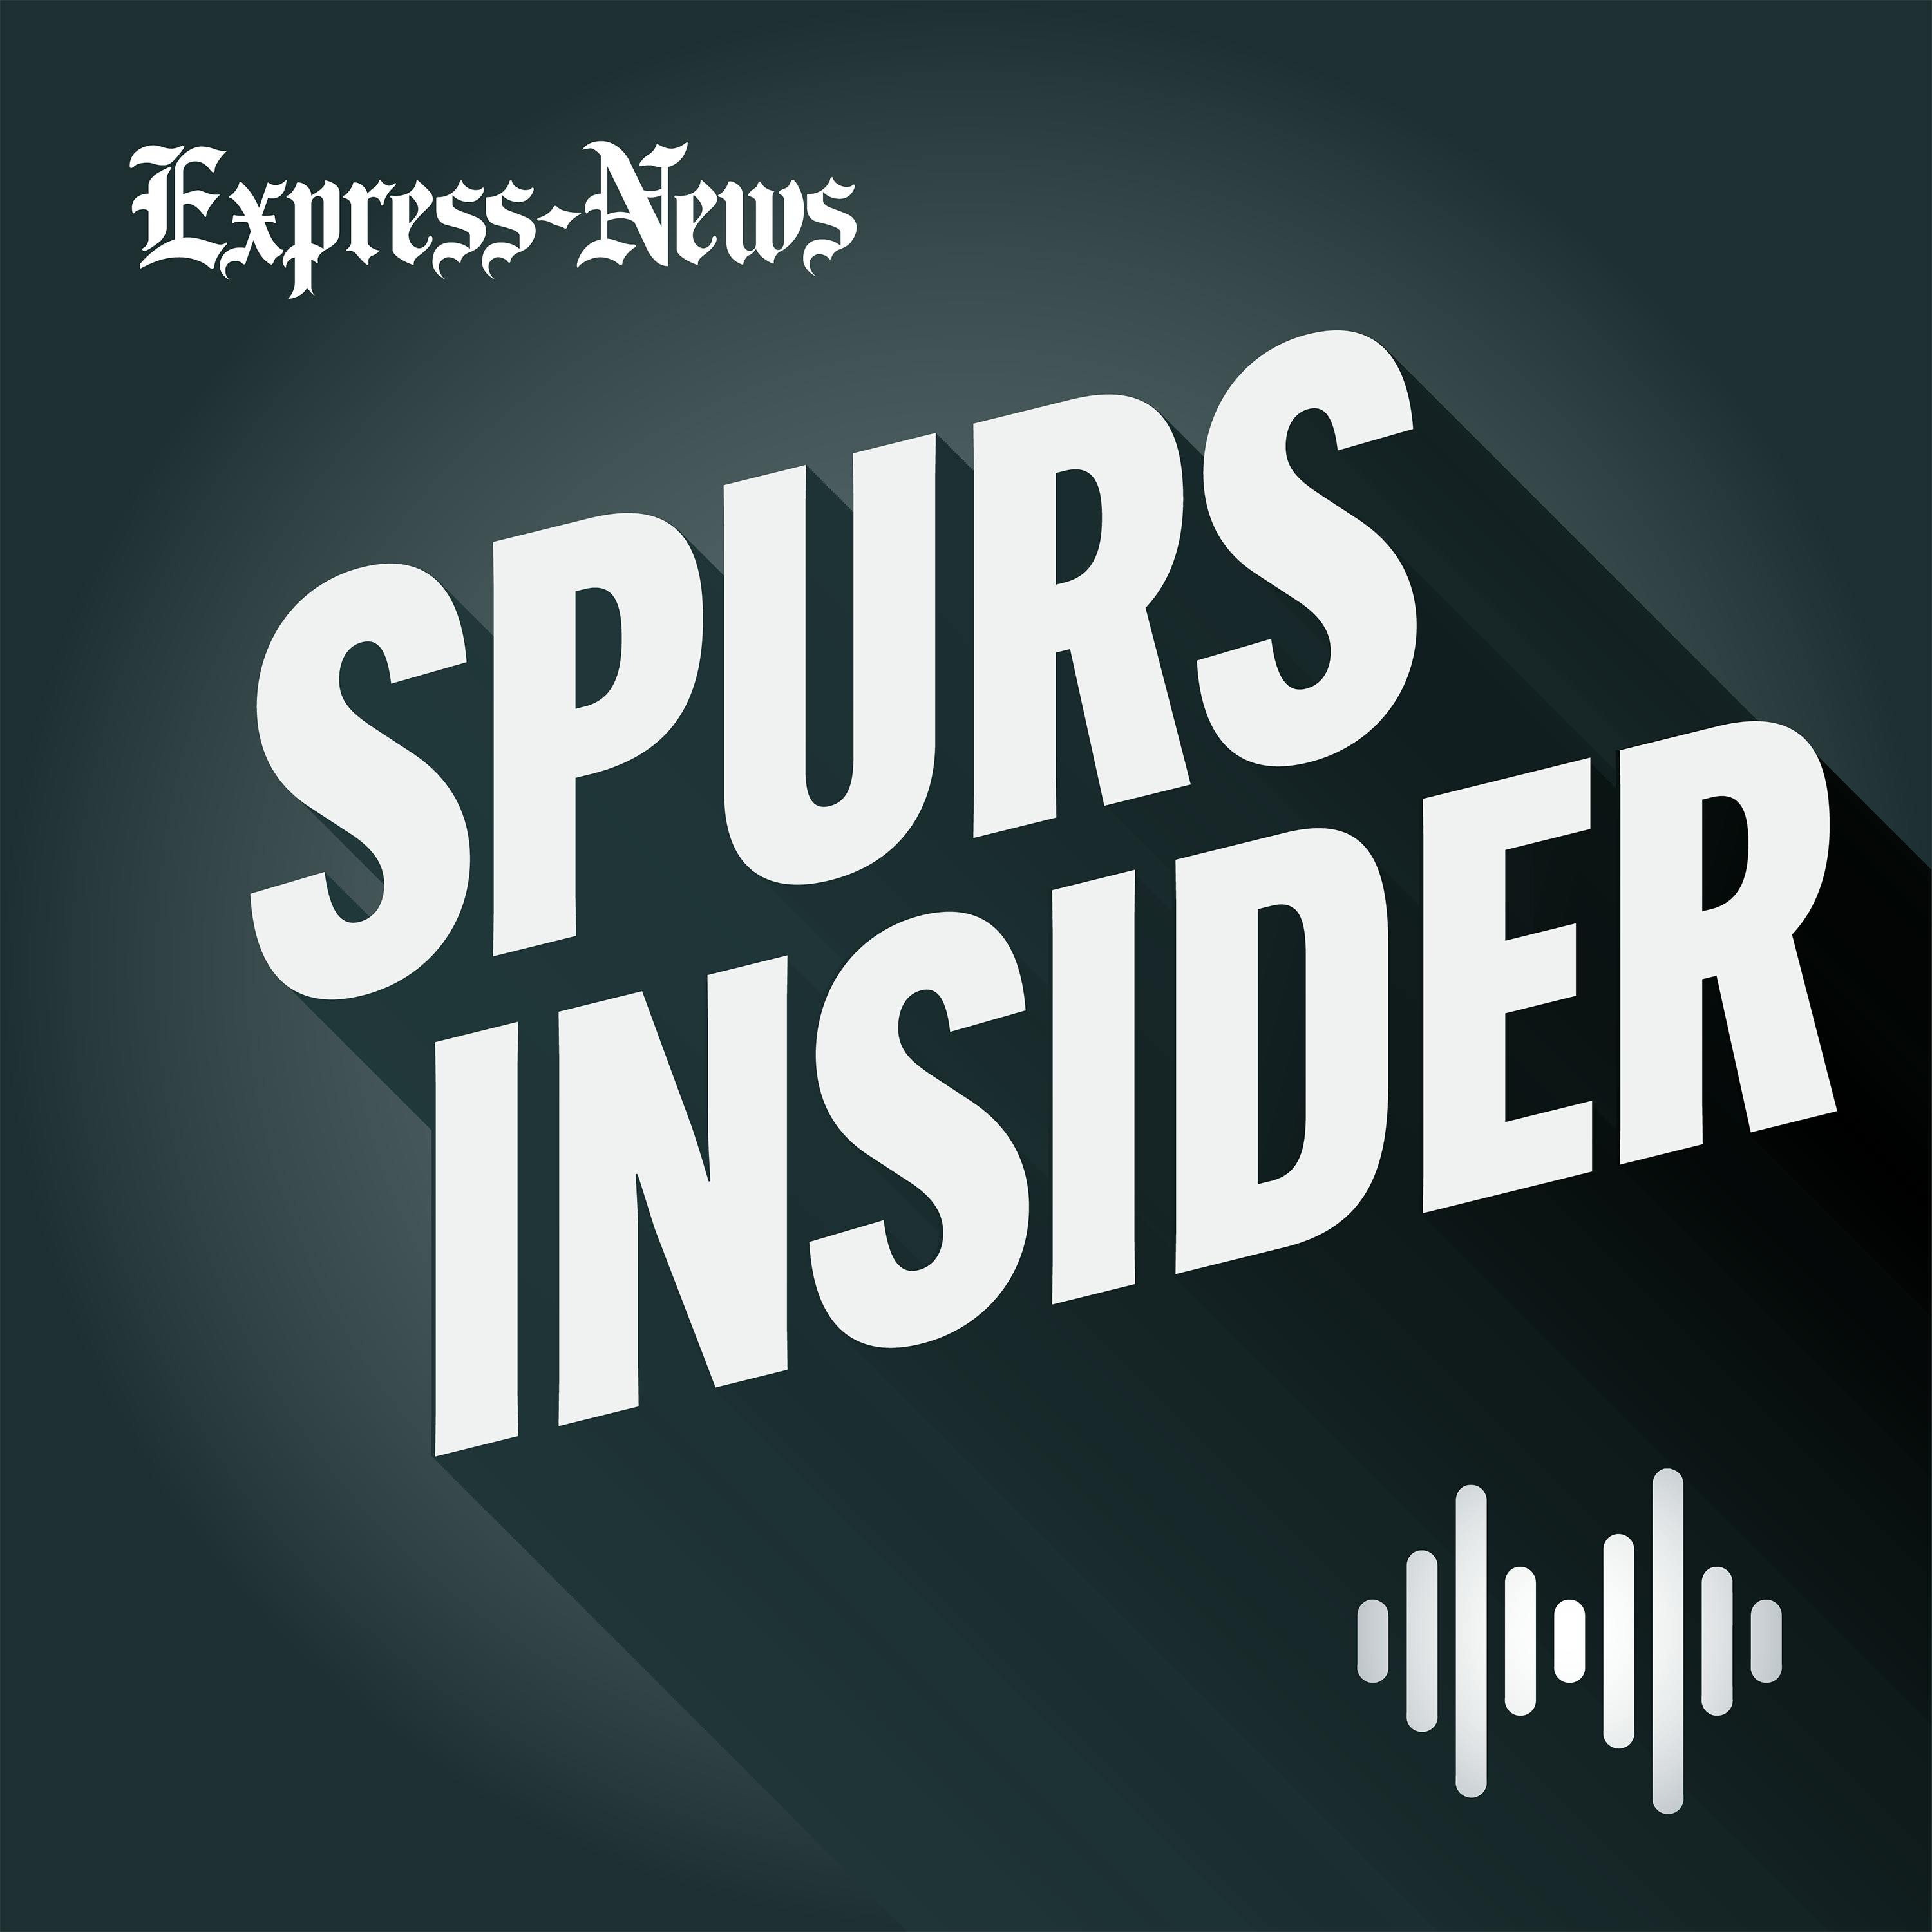 Popovich Ejected Twice in Three Games | Mike Finger